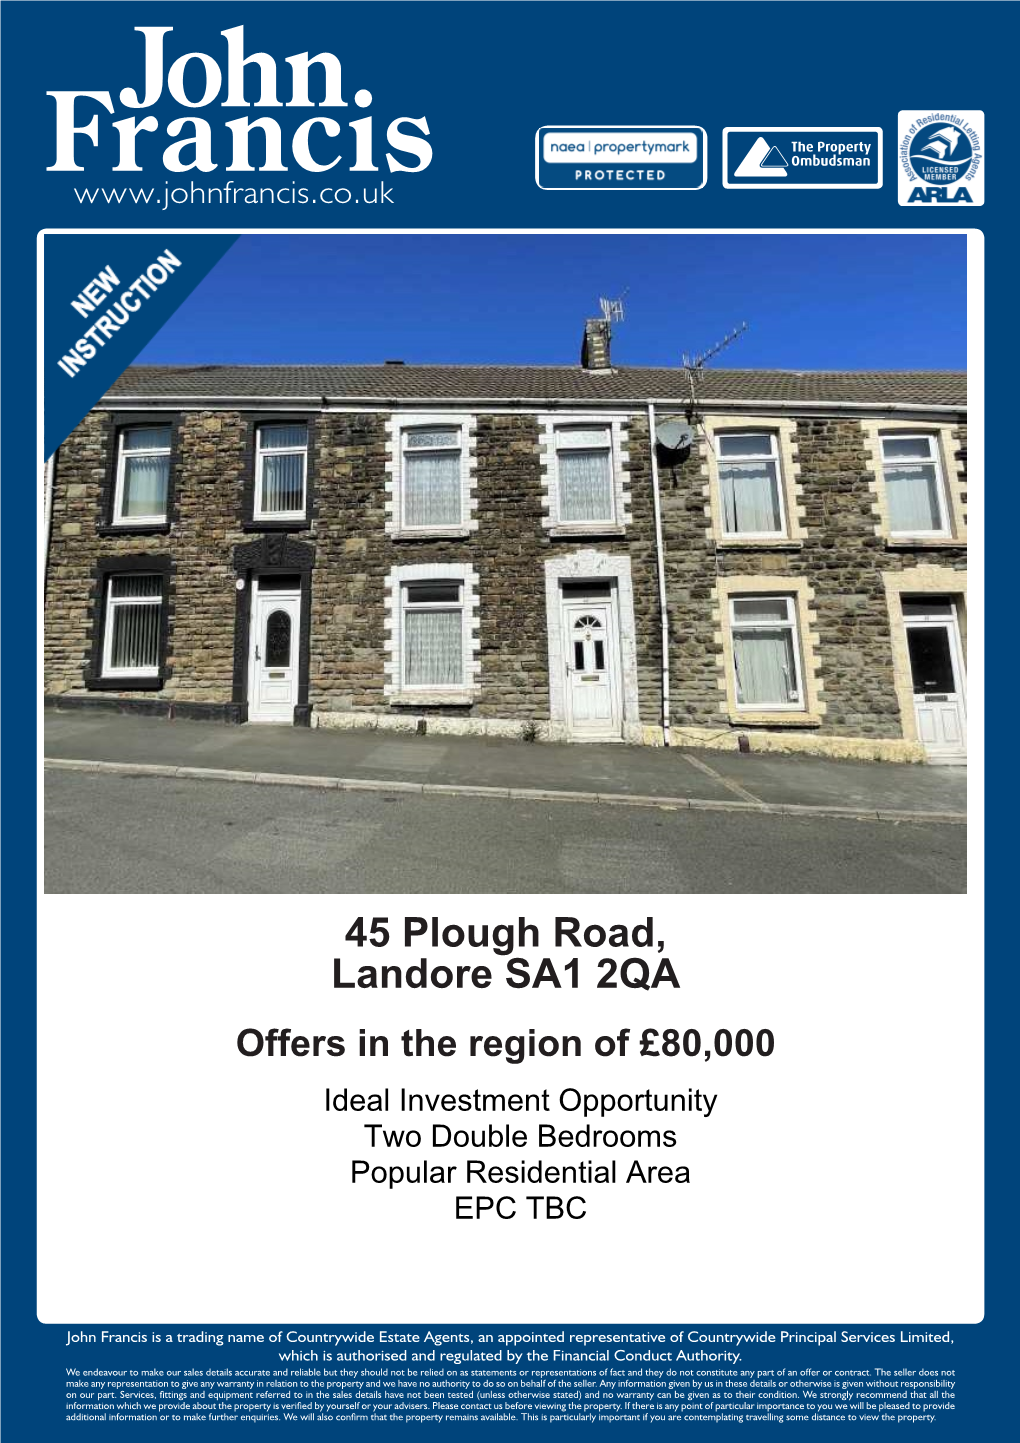 45 Plough Road, Landore SA1 2QA Offers in the Region of £80,000 • Ideal Investment Opportunity • Two Double Bedrooms • Popular Residential Area • EPC TBC